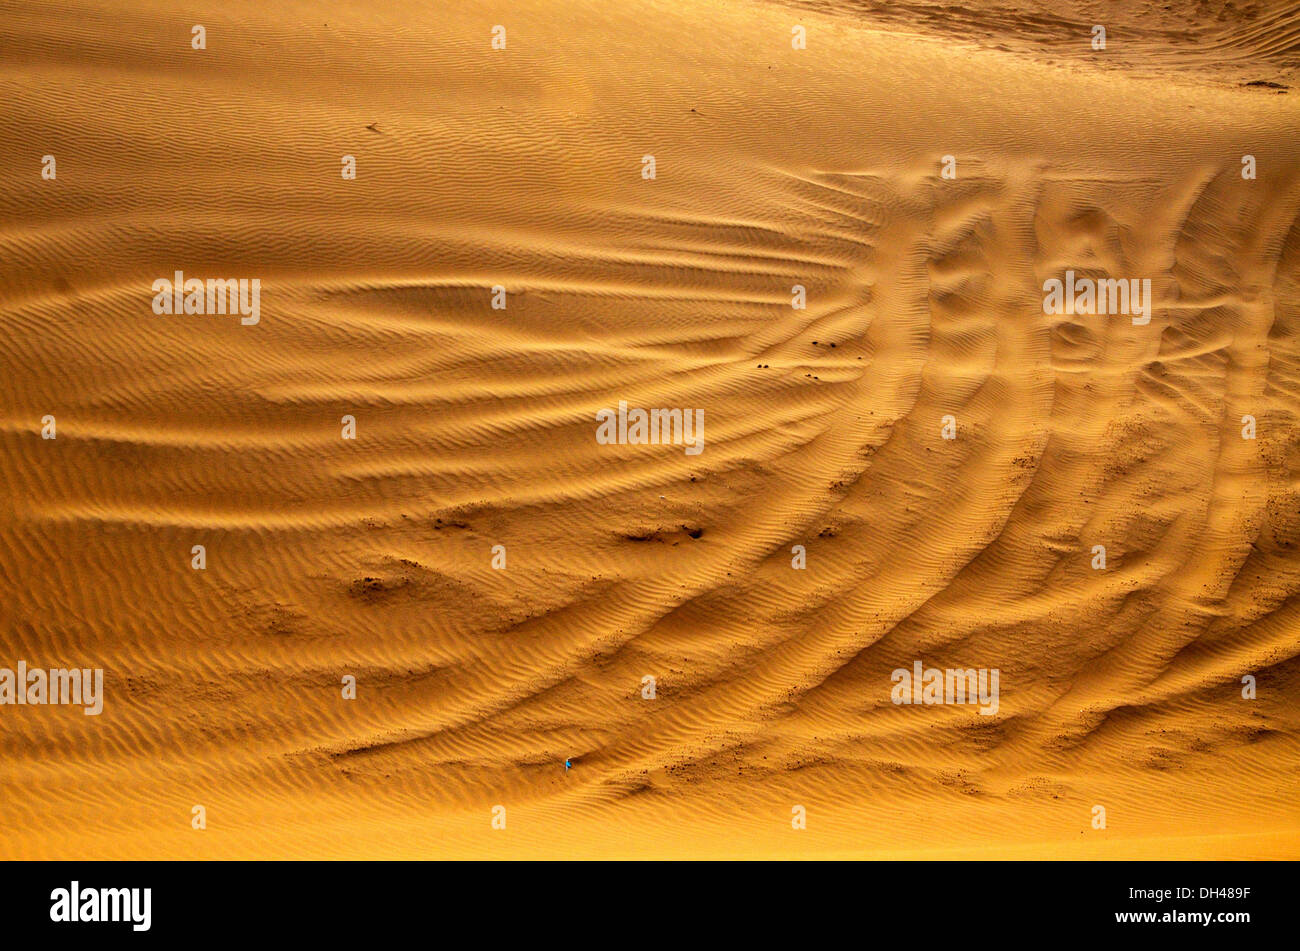 Marks of tyres of jeep on desert sand dunes Rajasthan India Asia Stock Photo